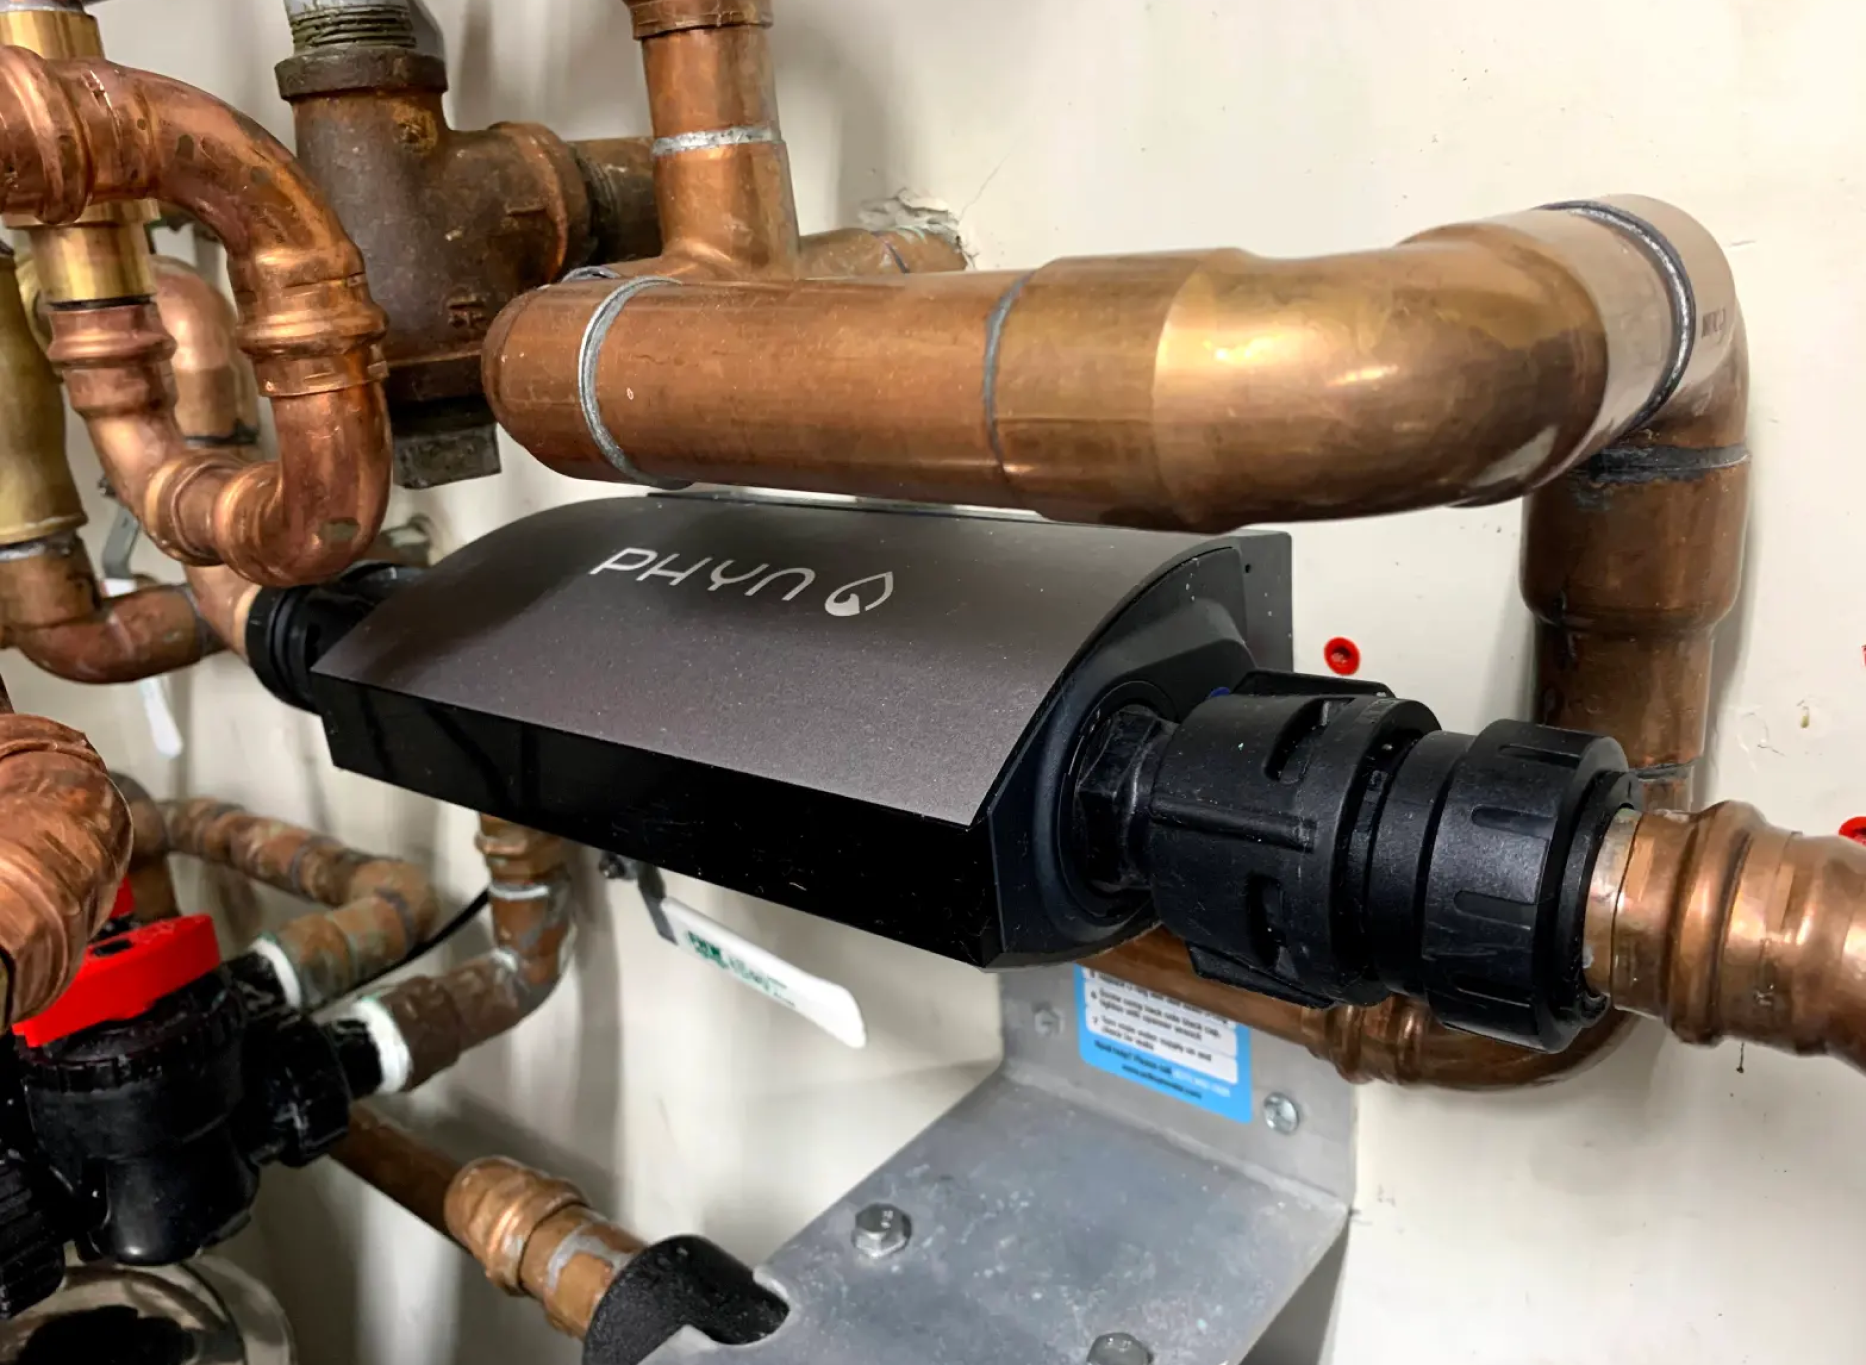 The Phyn Smart Sensor installed with pipes